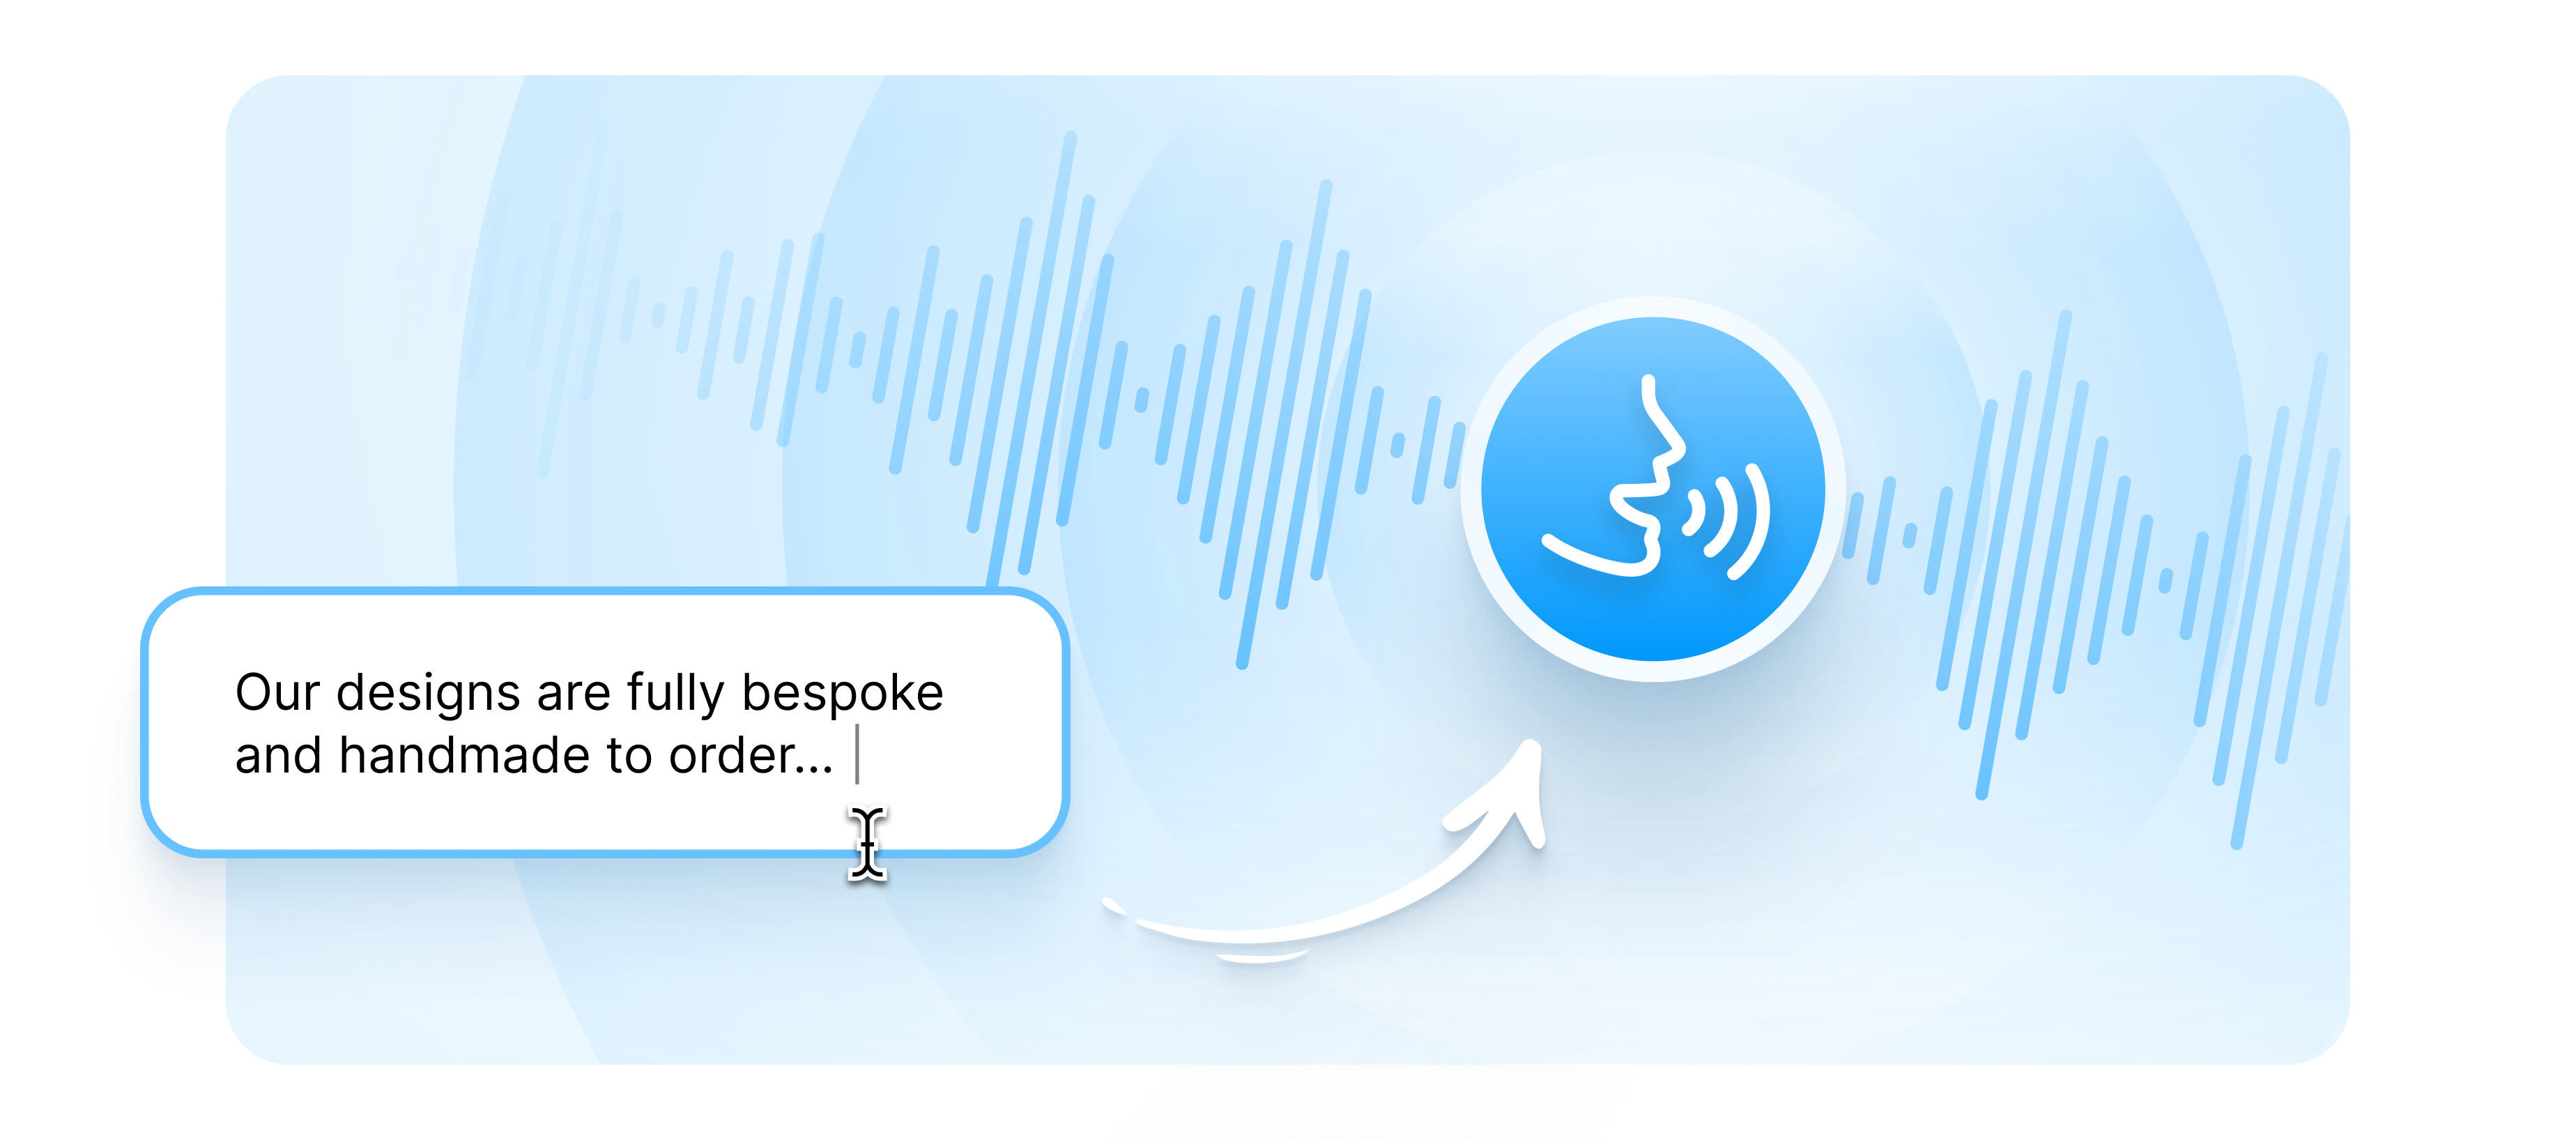 Text to Voice Generator - Convert Text to Voice Online 